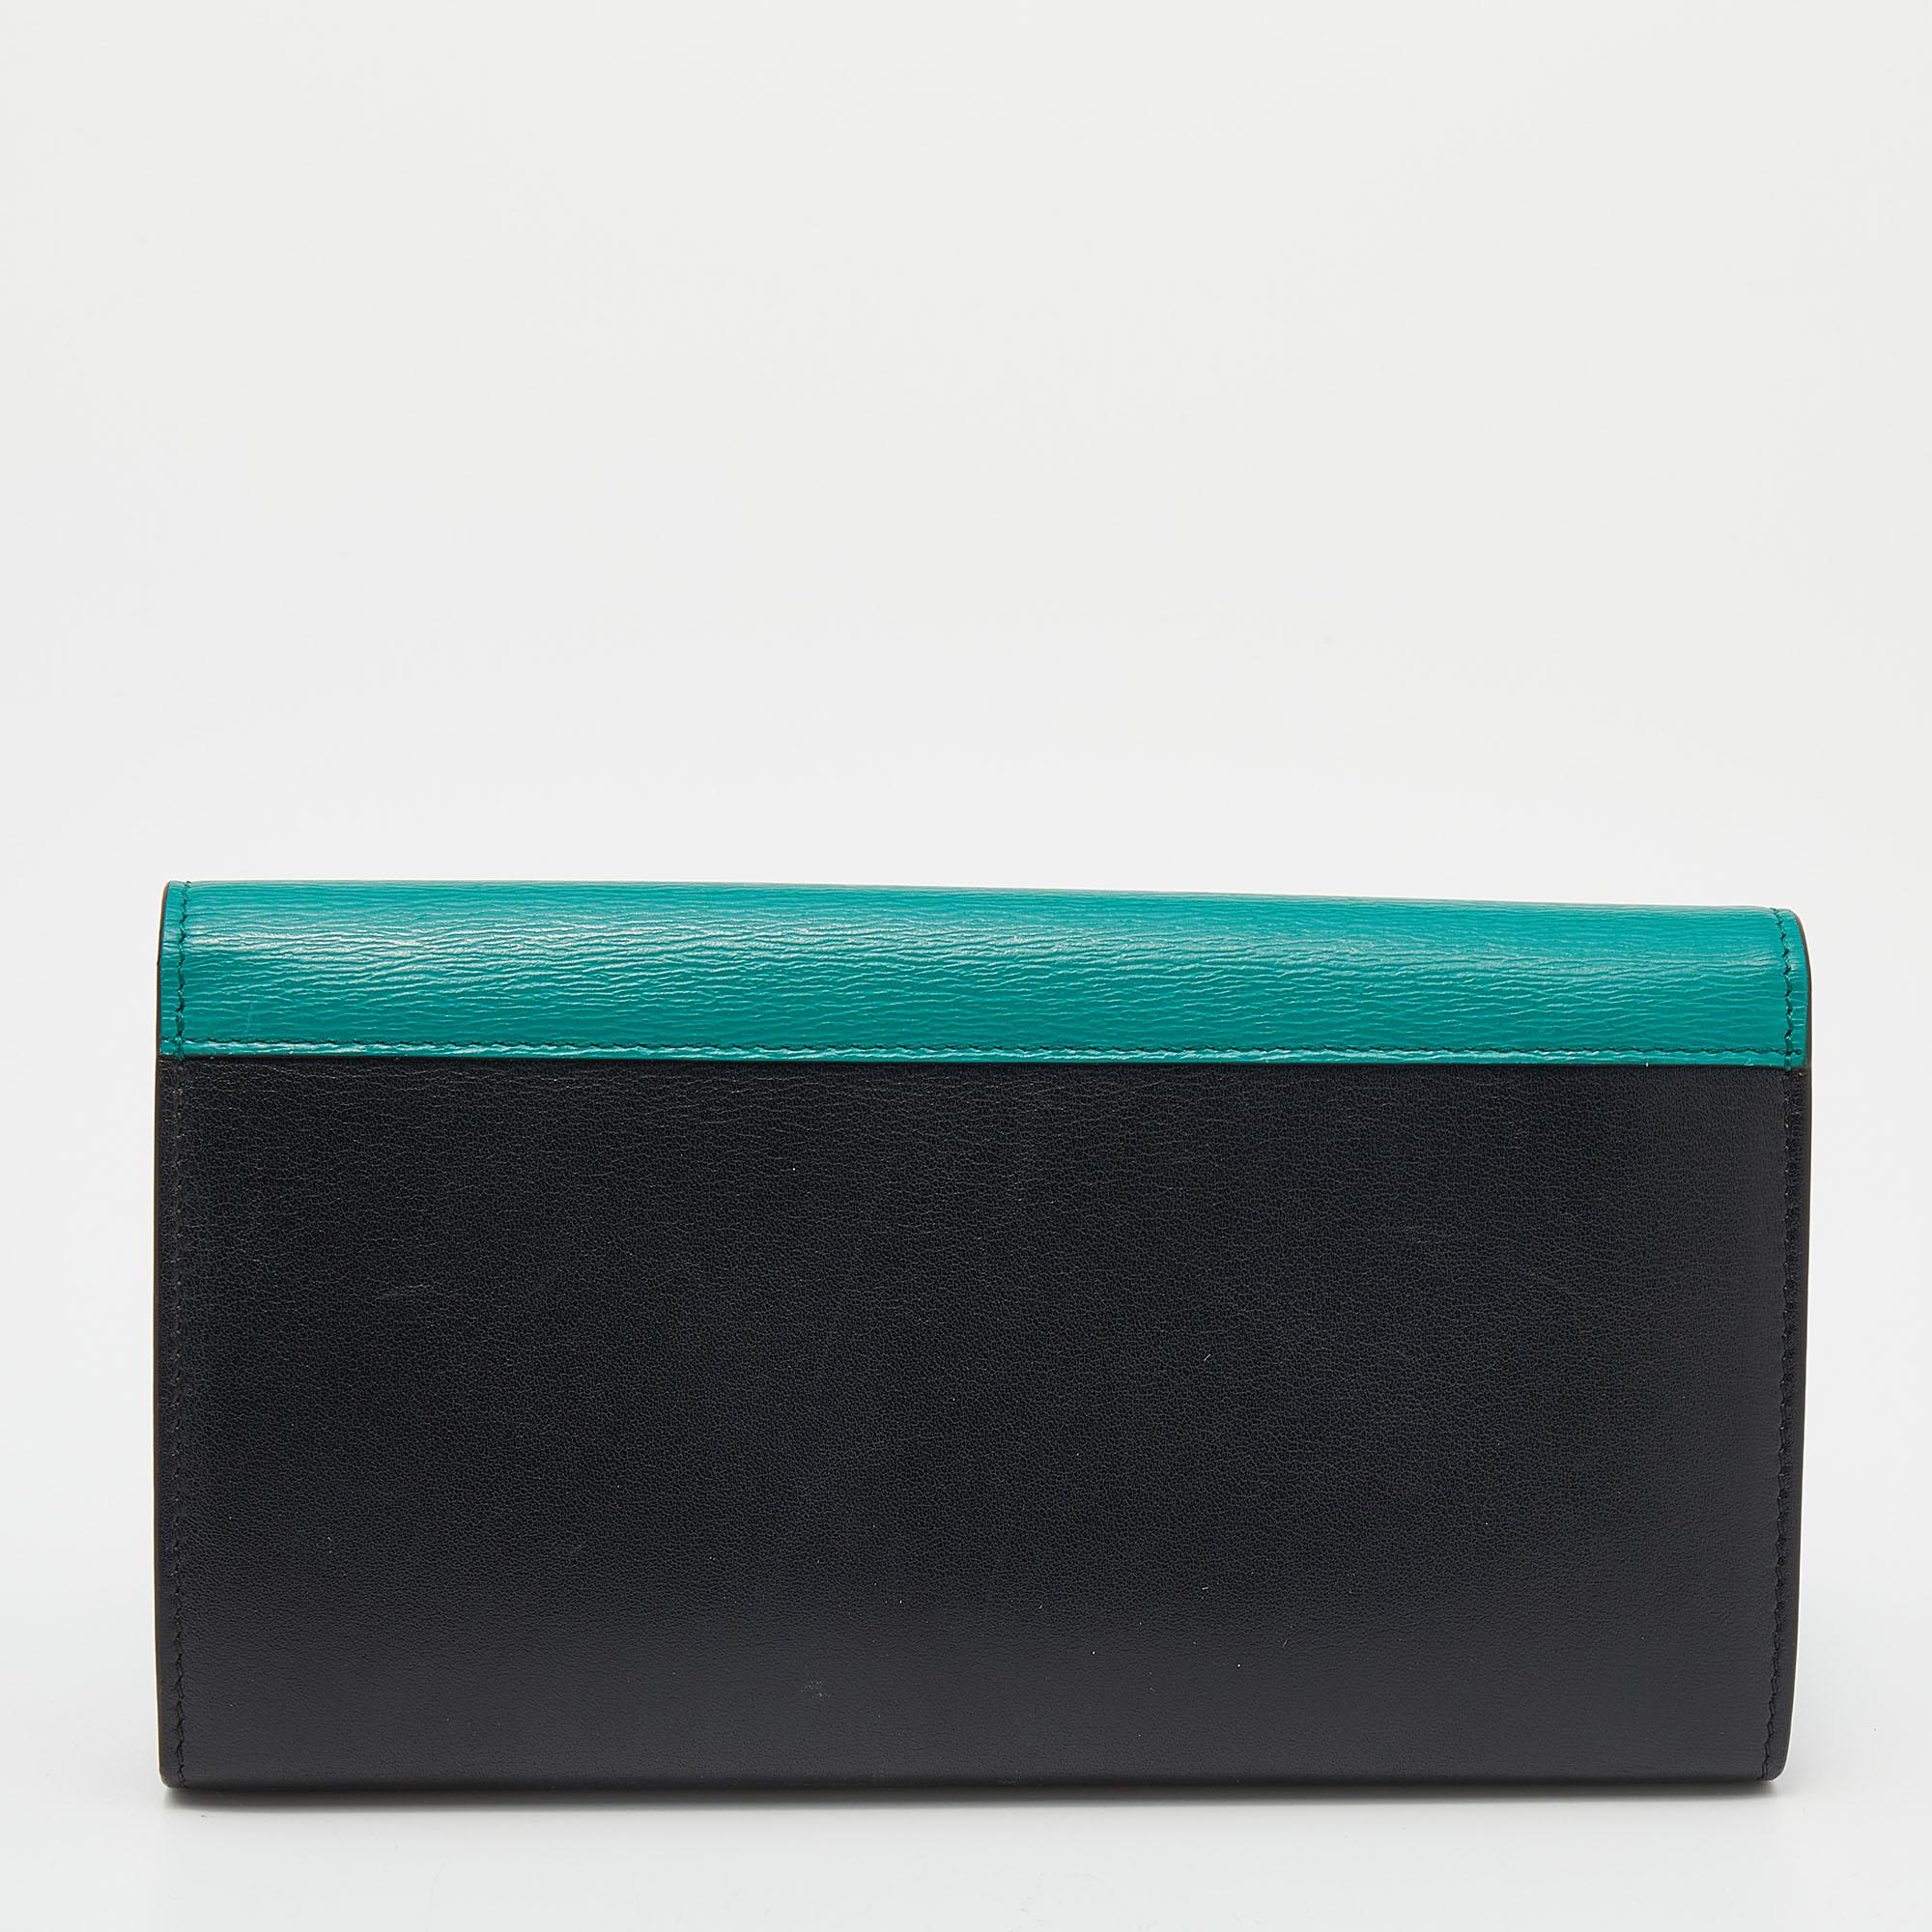 Carry your essentials in style with this Celine flap wallet. Crafted from leather in three different hues, the creation has a snap flap closure and a leather interior. Organizing becomes chic and easy with this envelope wallet.

